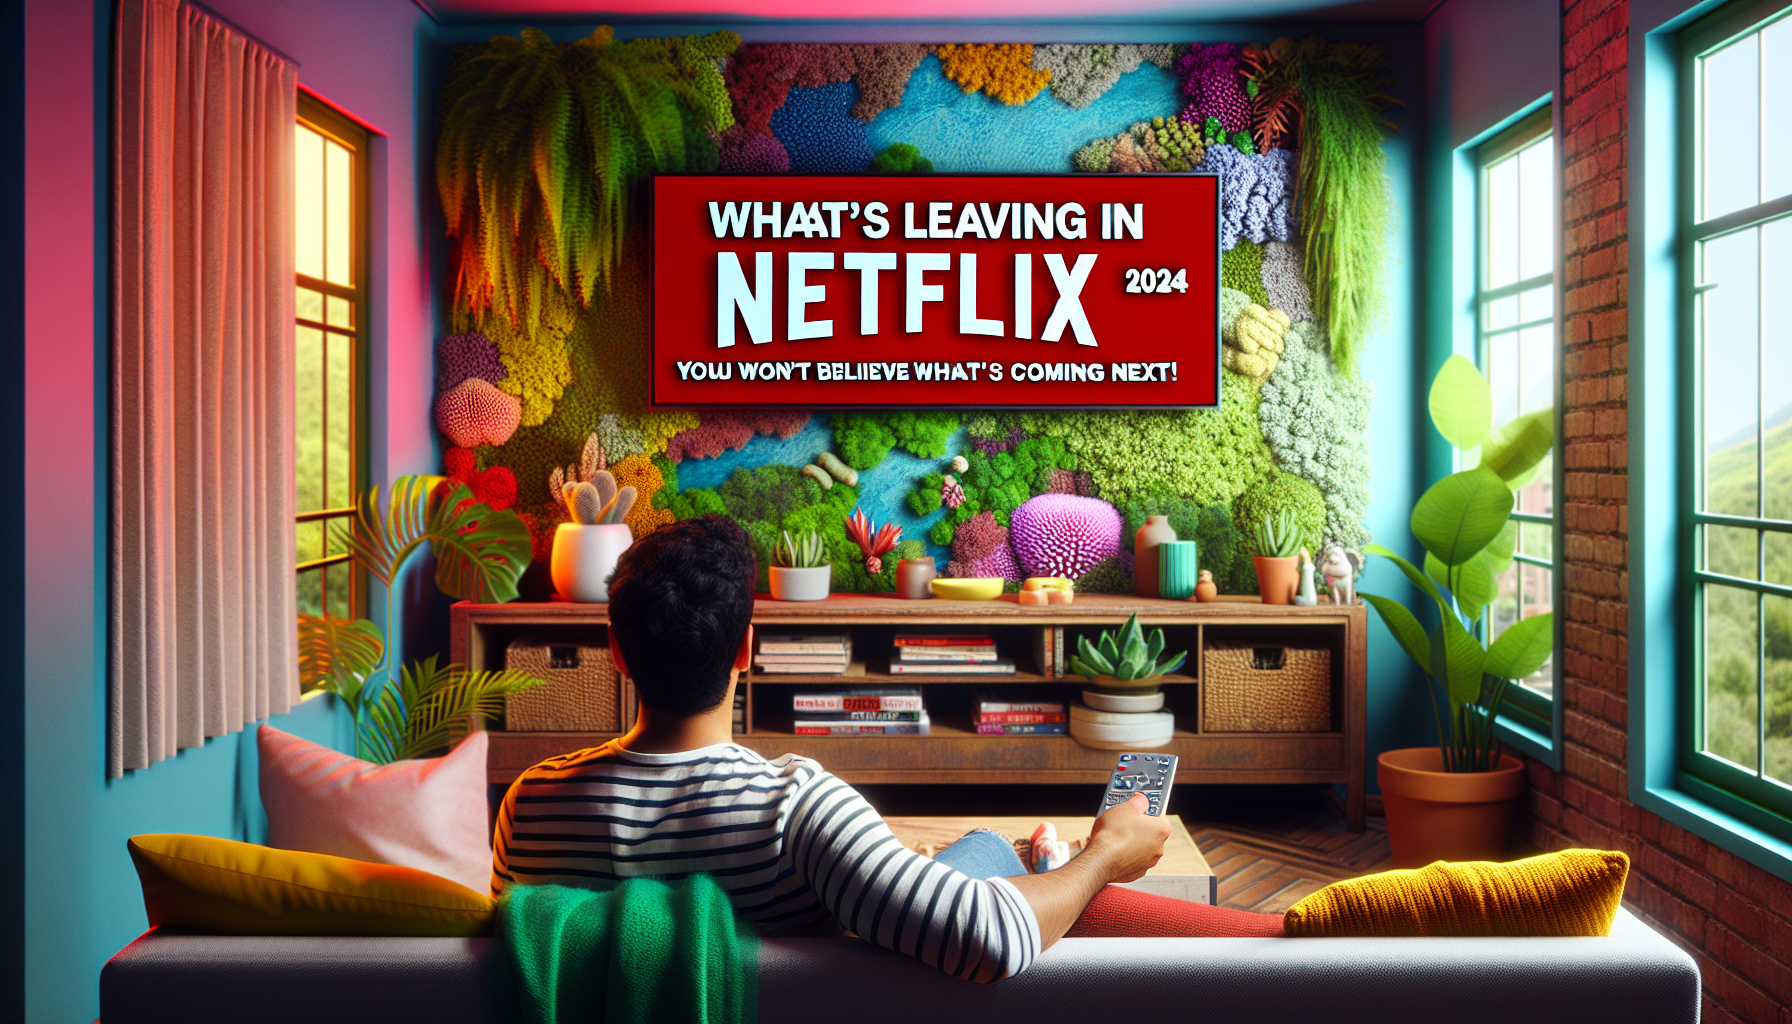 find out what will no longer be available on netflix in june 2024 and get ready to be amazed by what’s coming soon!